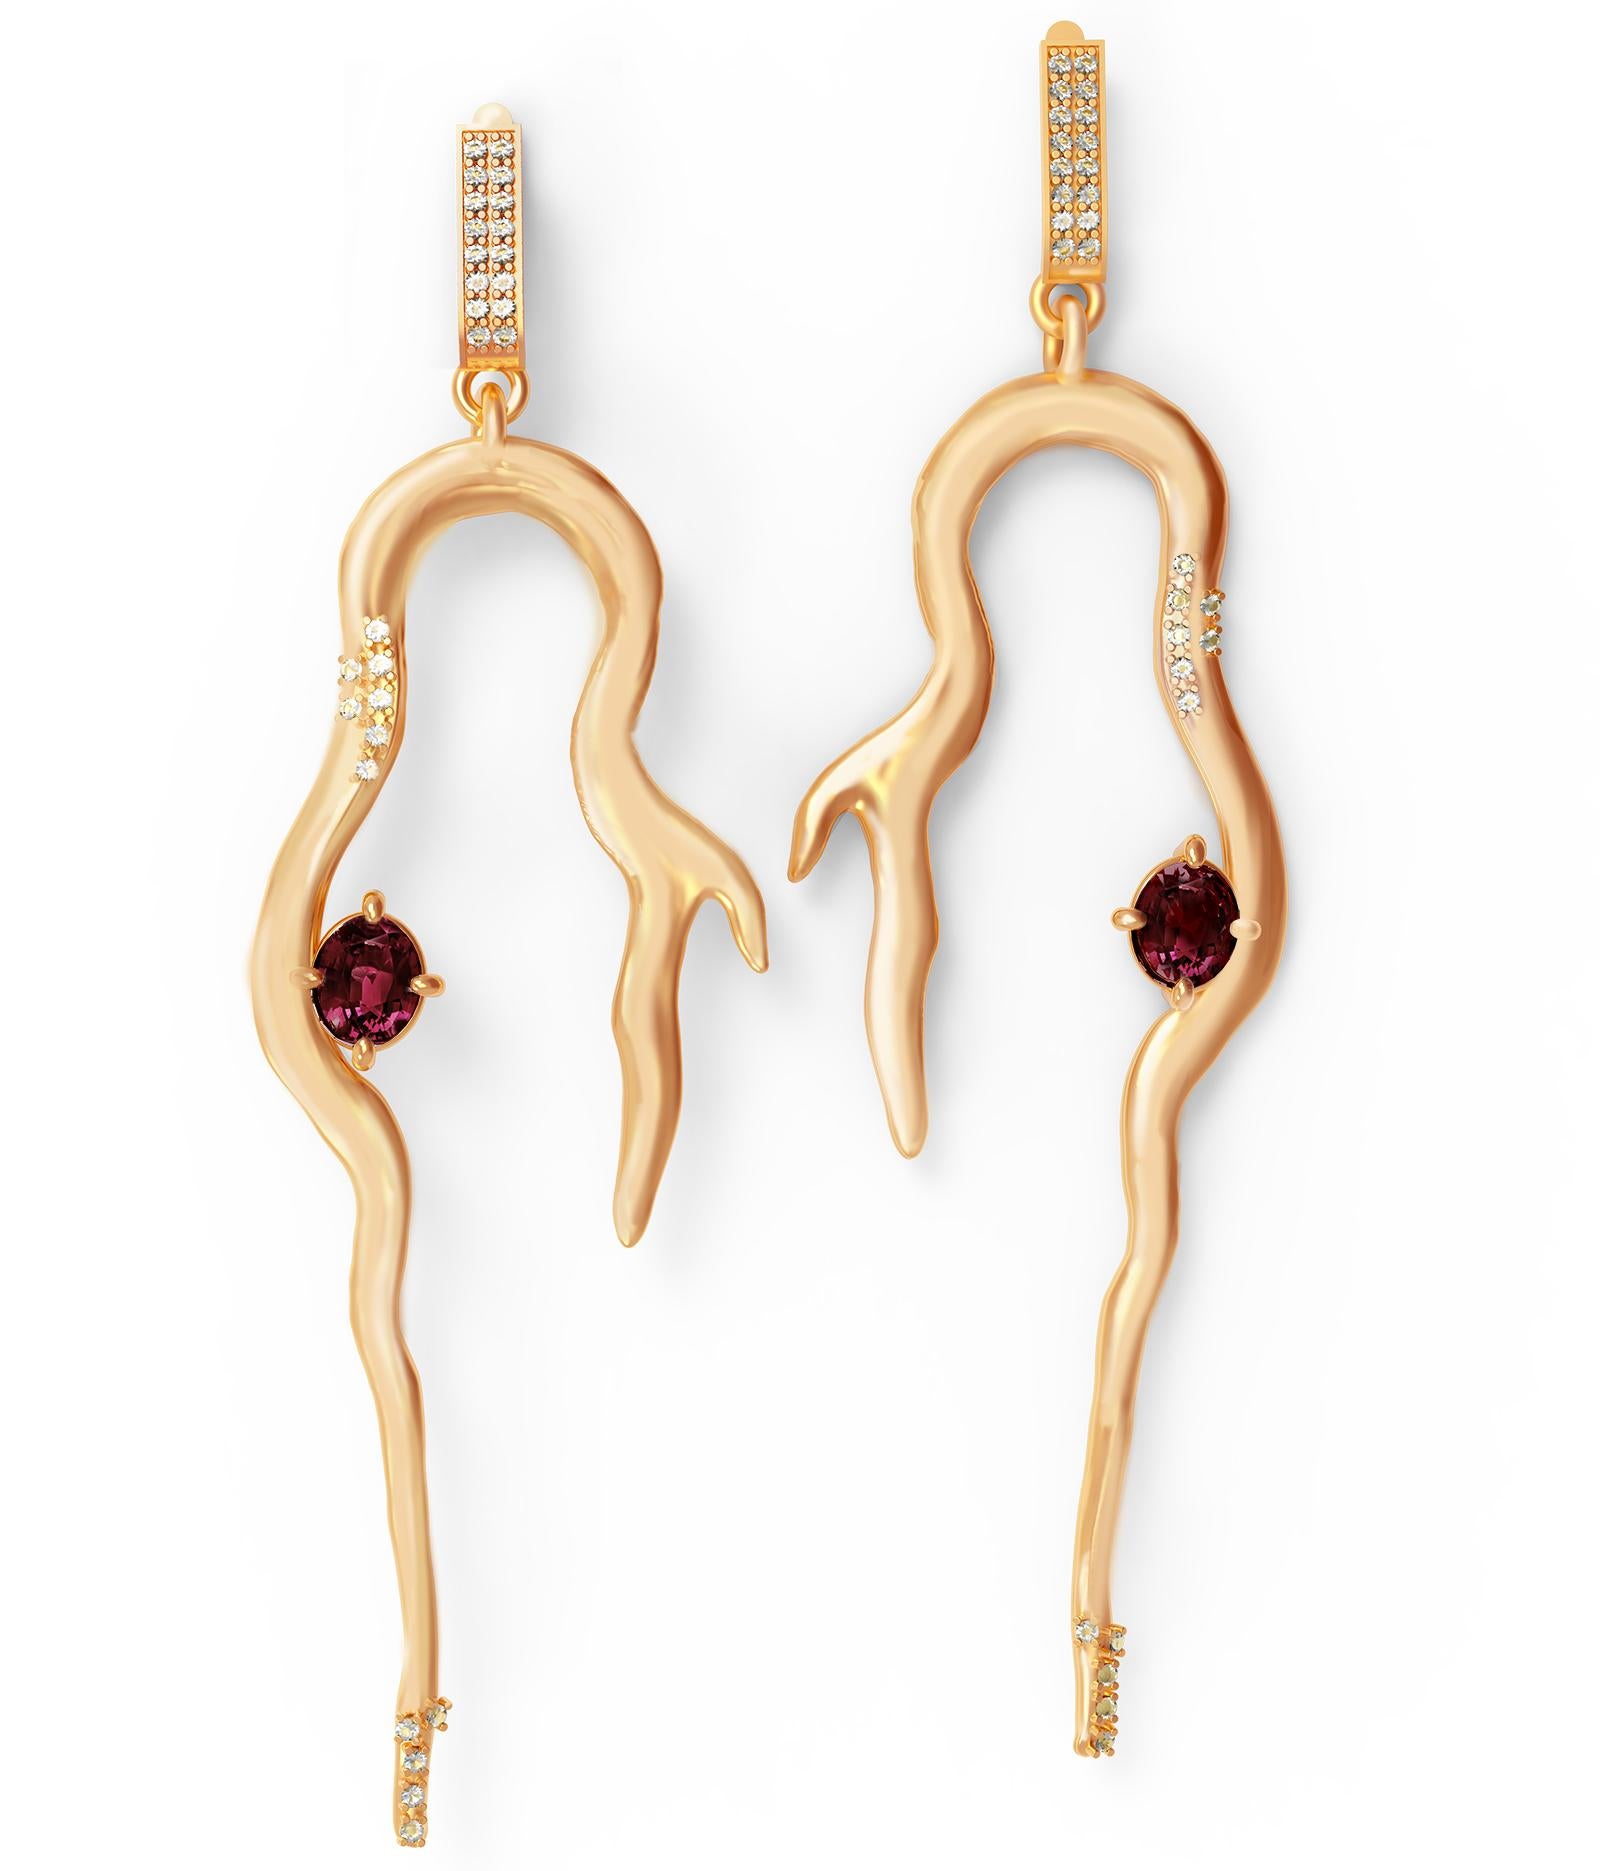 These contemporary 18 karat yellow gold cocktail earrings are encrusted with natural round diamonds and wine red oval sapphire and matching Malaya garnet. Pine jewellery collection was featured in Vogue UA, Another UK, Interview, and other